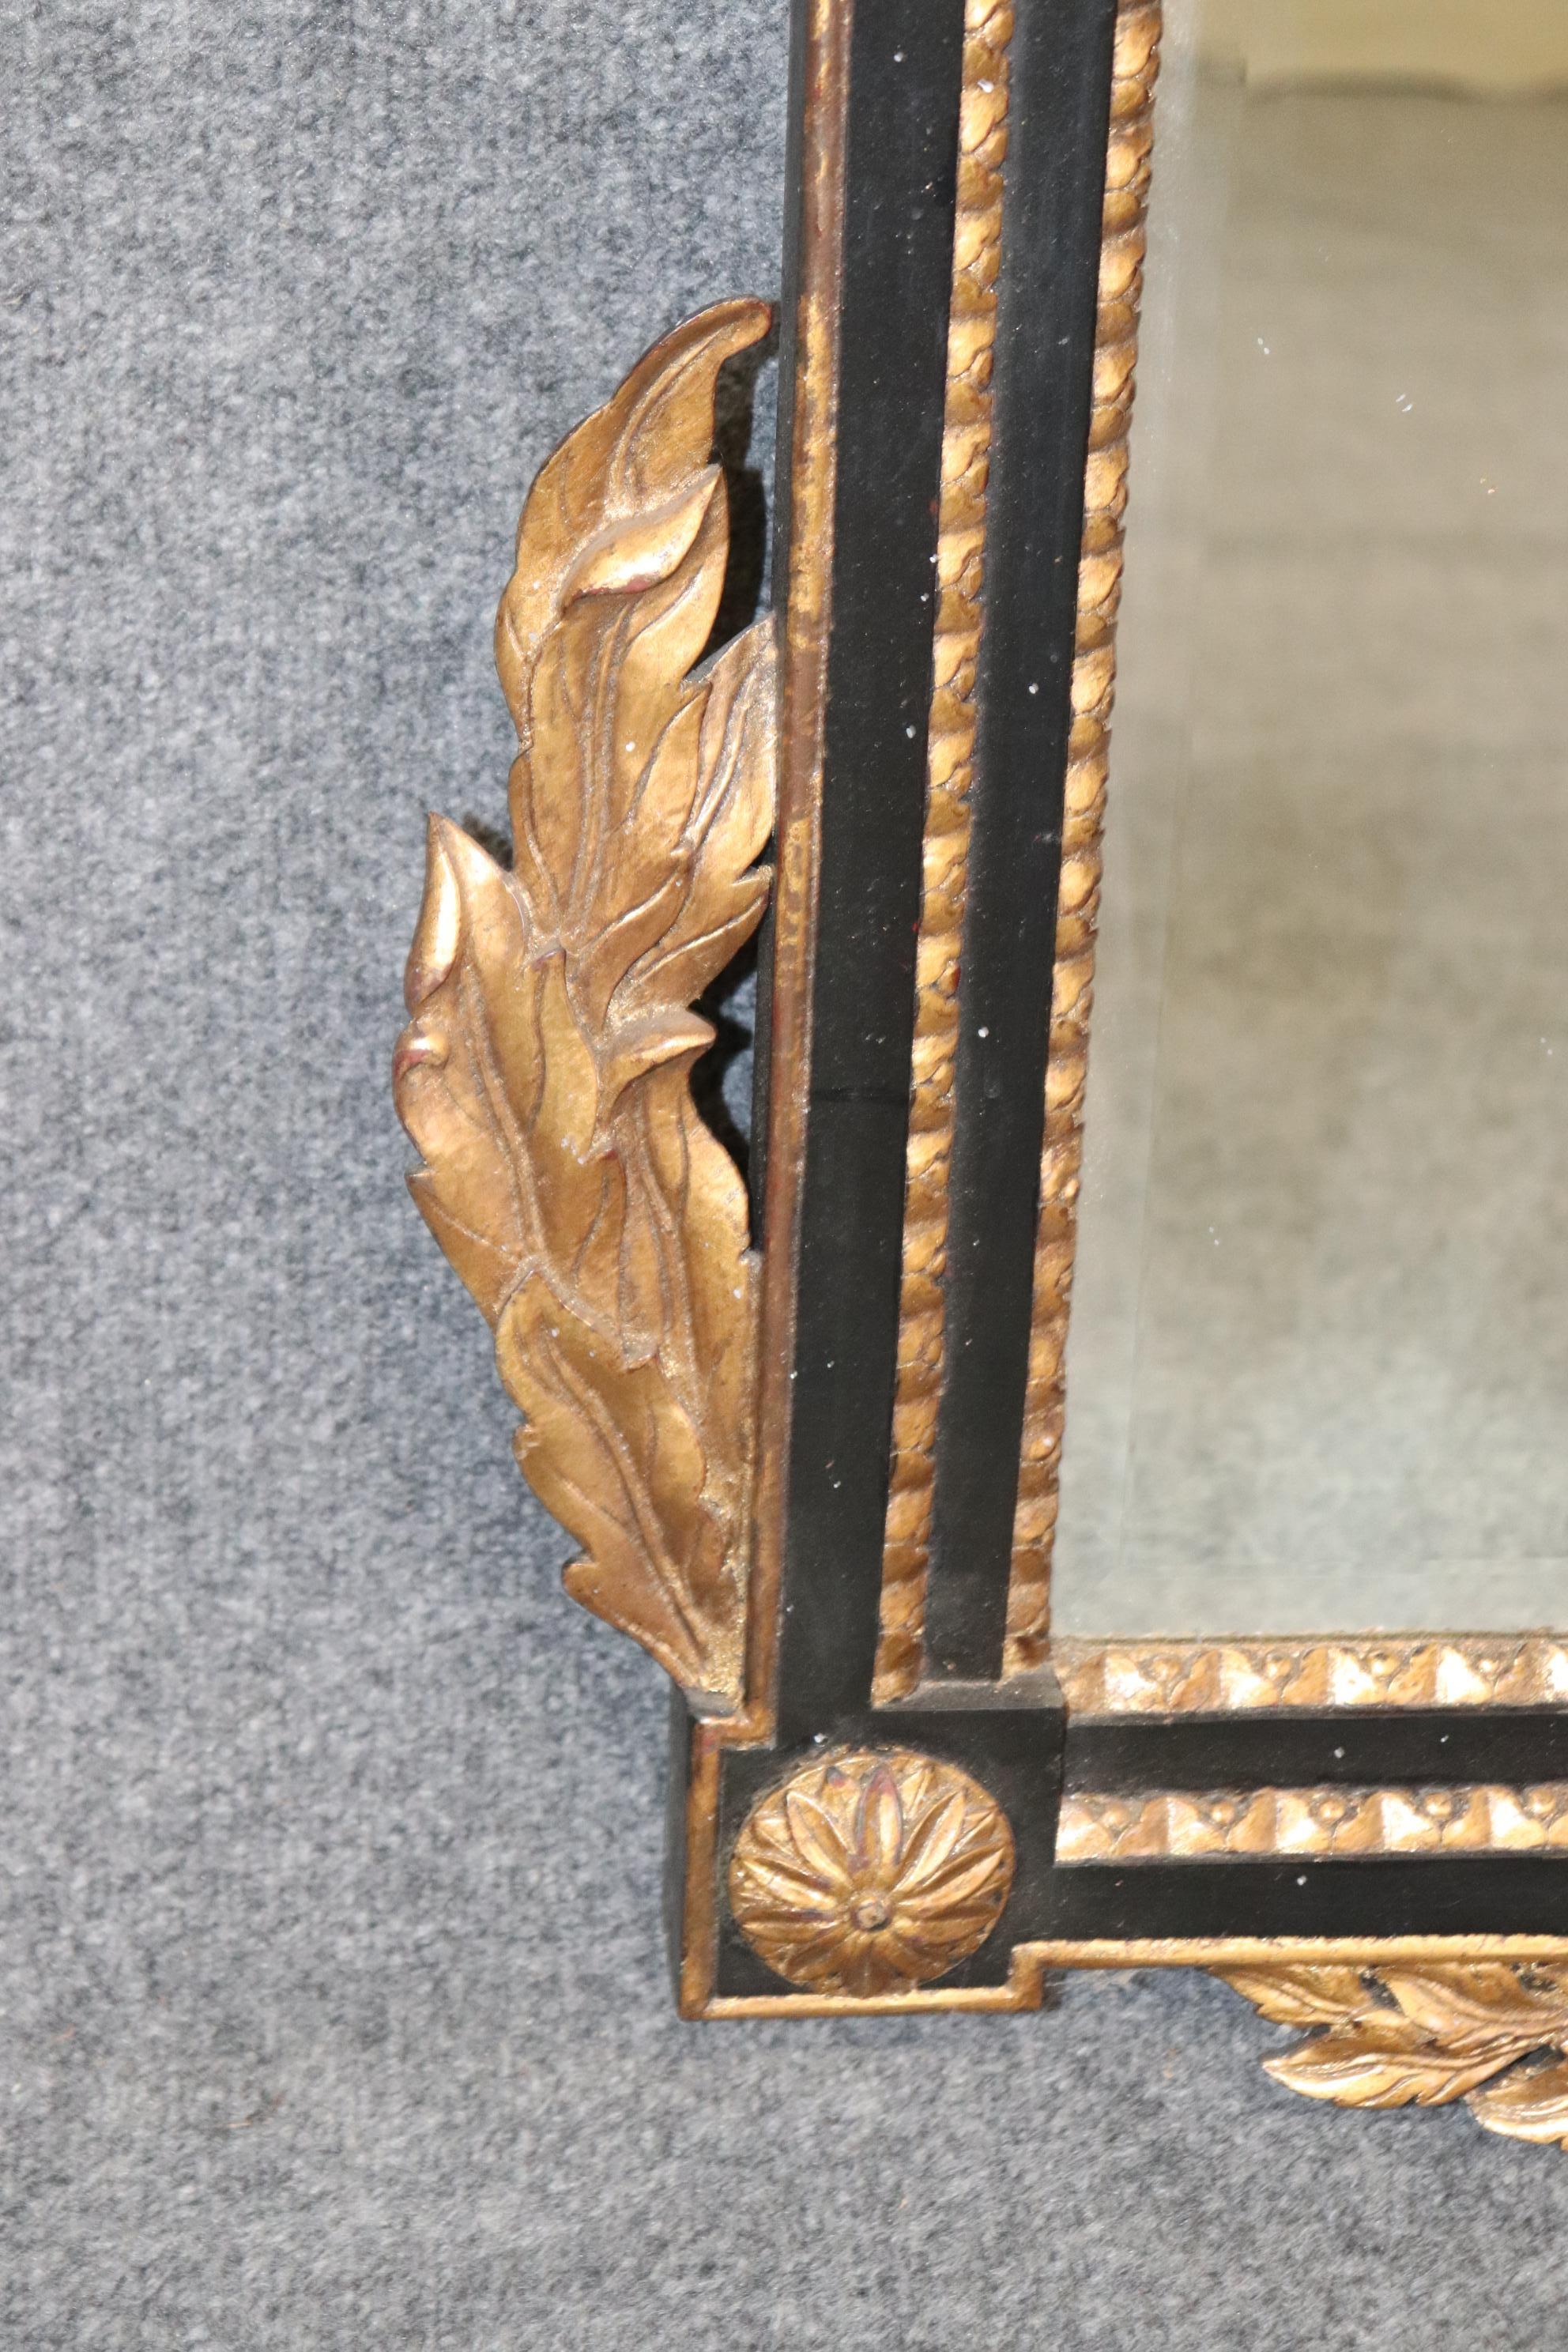 20th Century Regency Style Ebonized and Gilt Carved Floral Wall Hanging Mirror For Sale